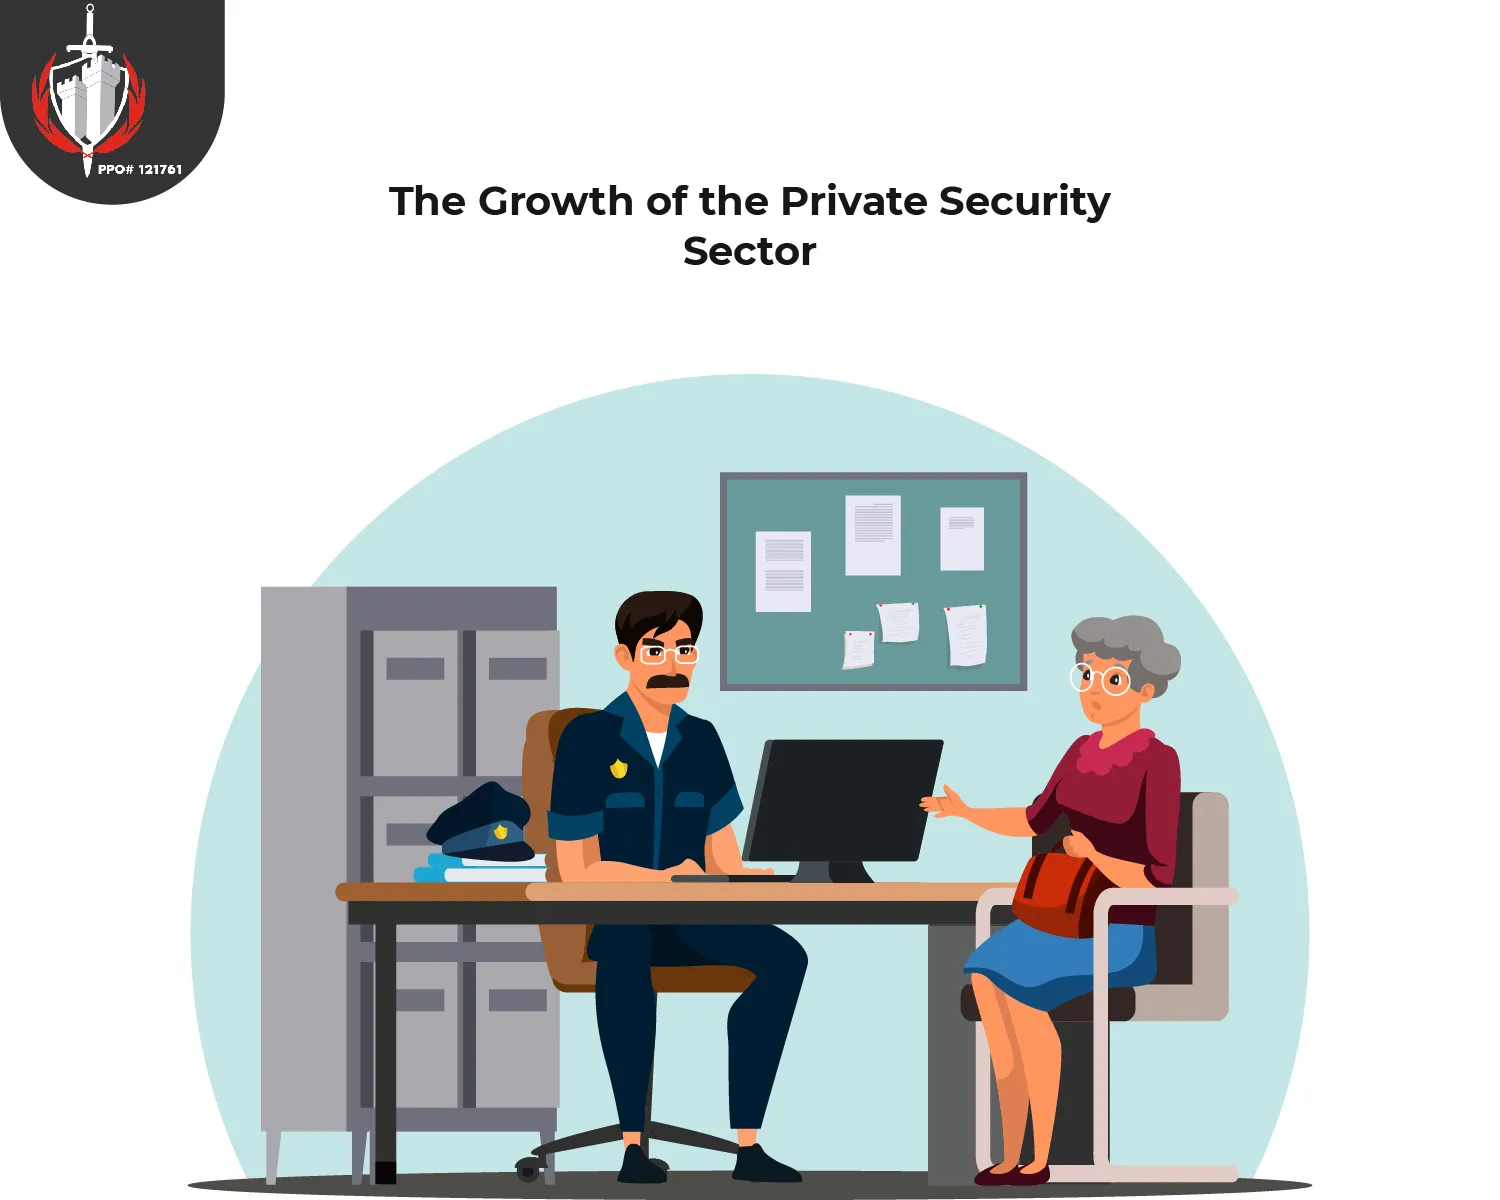 The Growth of the Private Security Sector